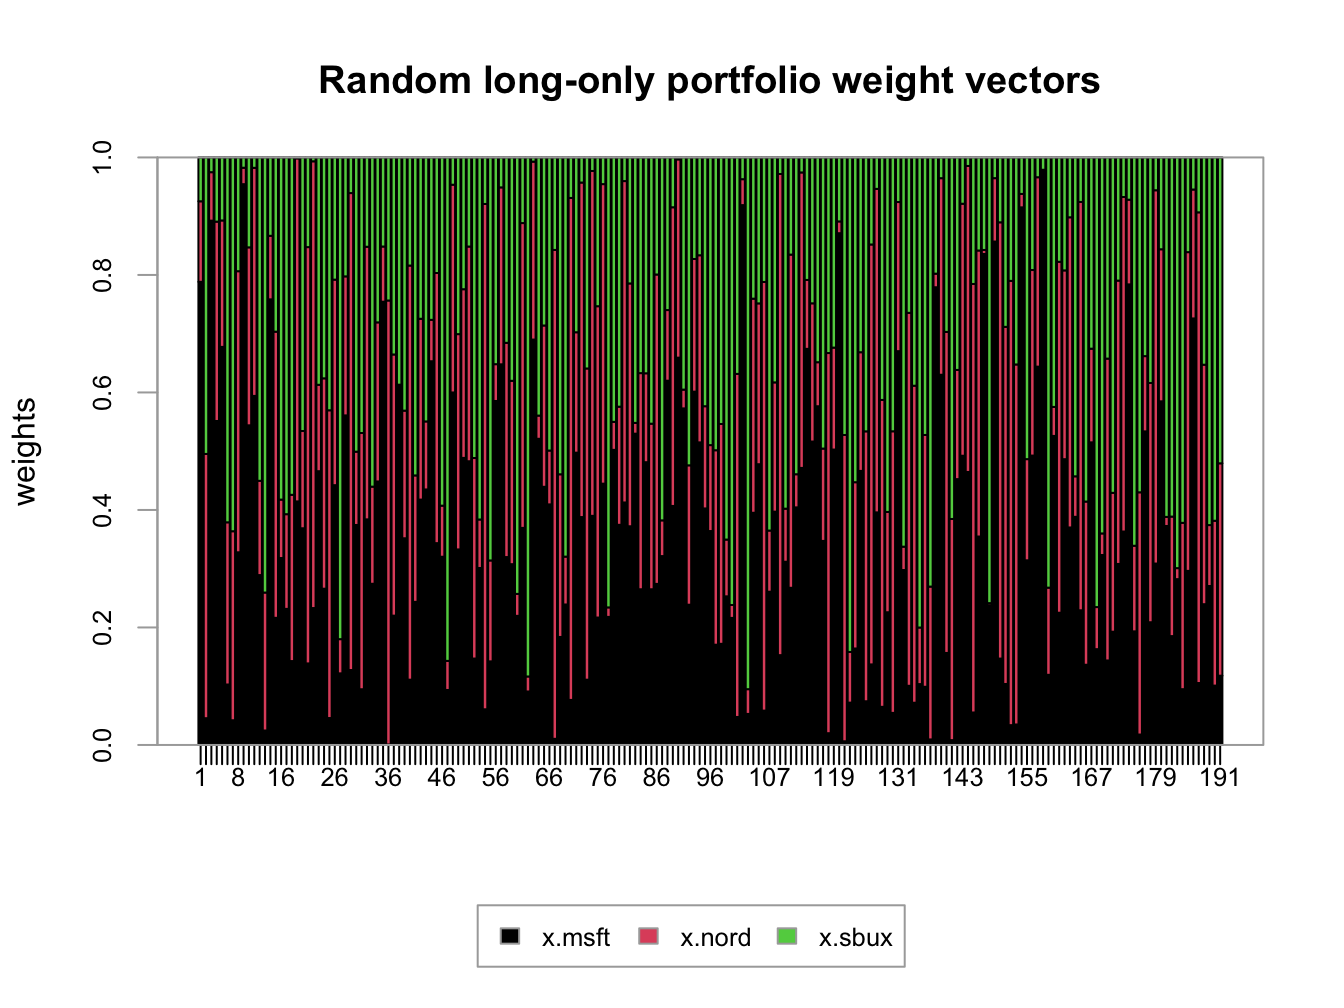 Weights on 191 random long-only portfolios of Microsoft, Nordstrom and Starbucks.